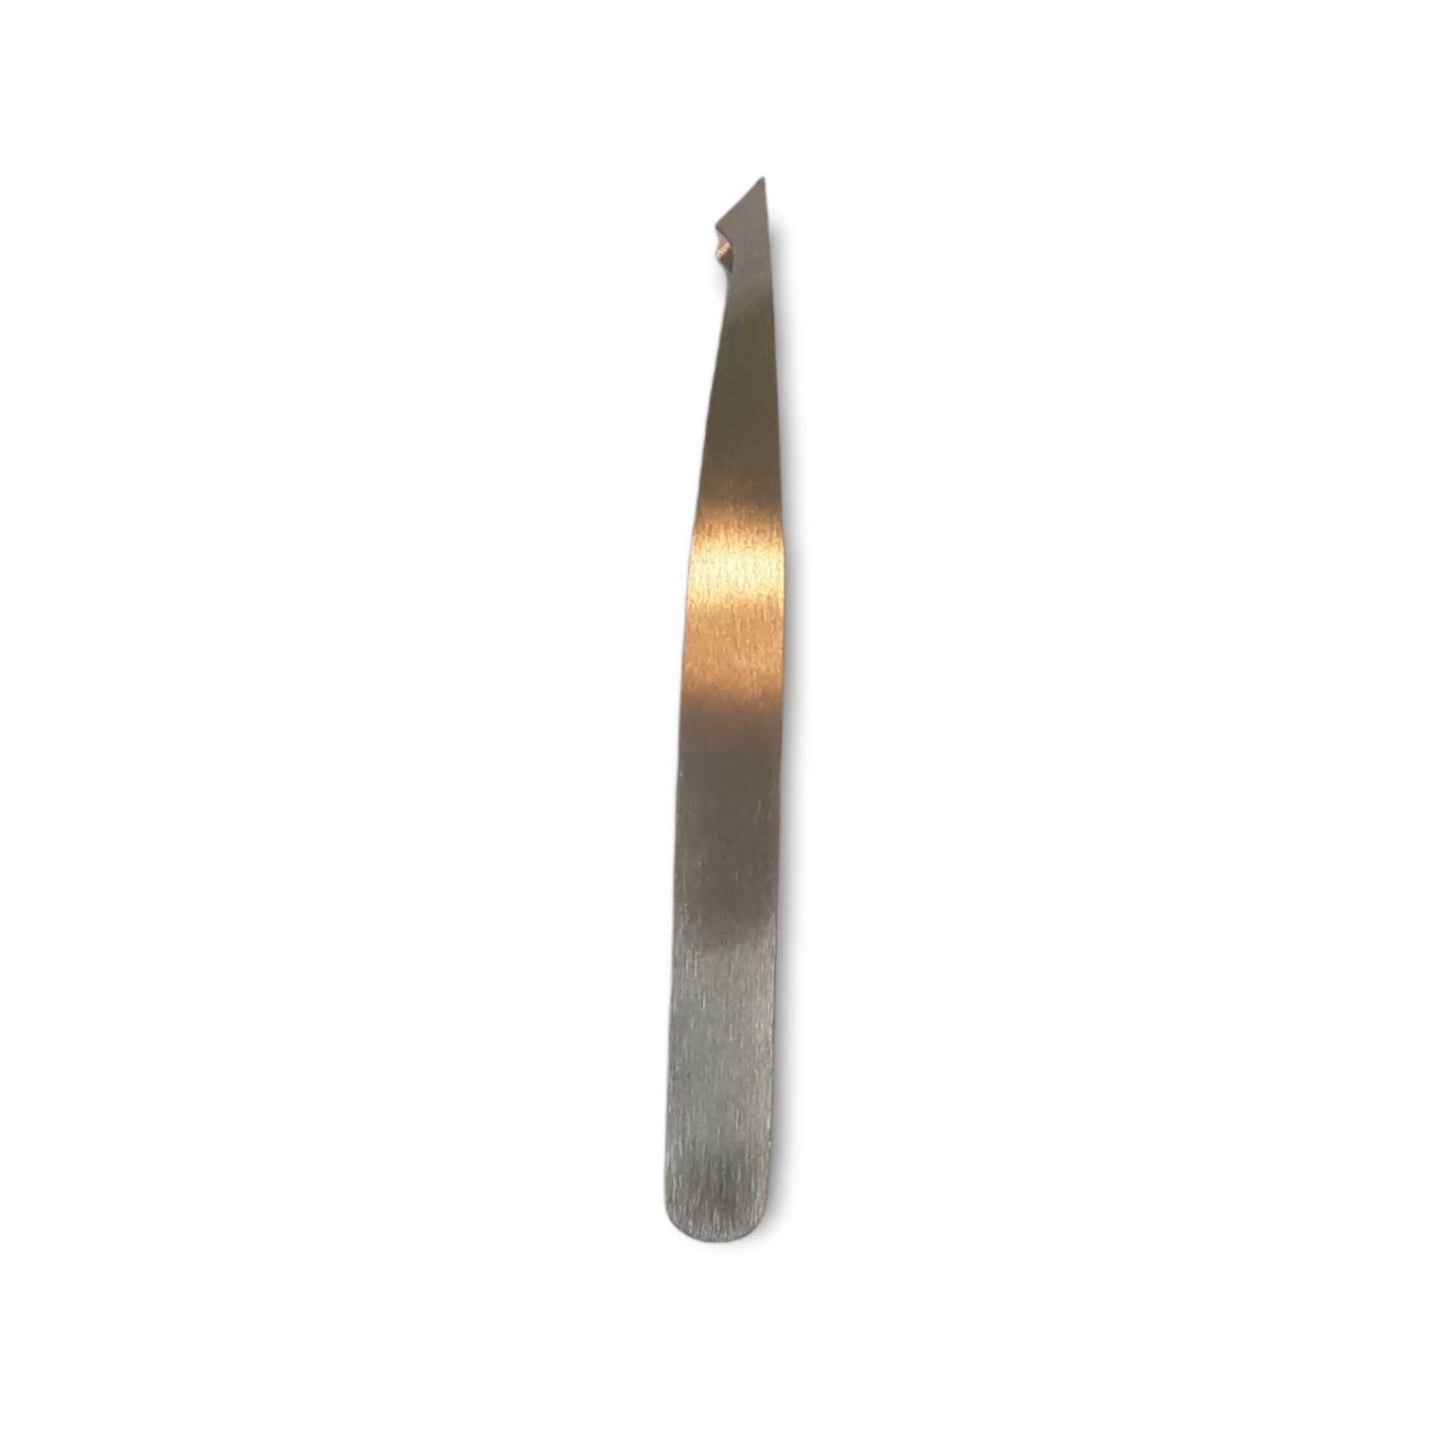 Silver Star Tweezer For Eyebrow #8928 Classique Nails Beauty Supply Inc.